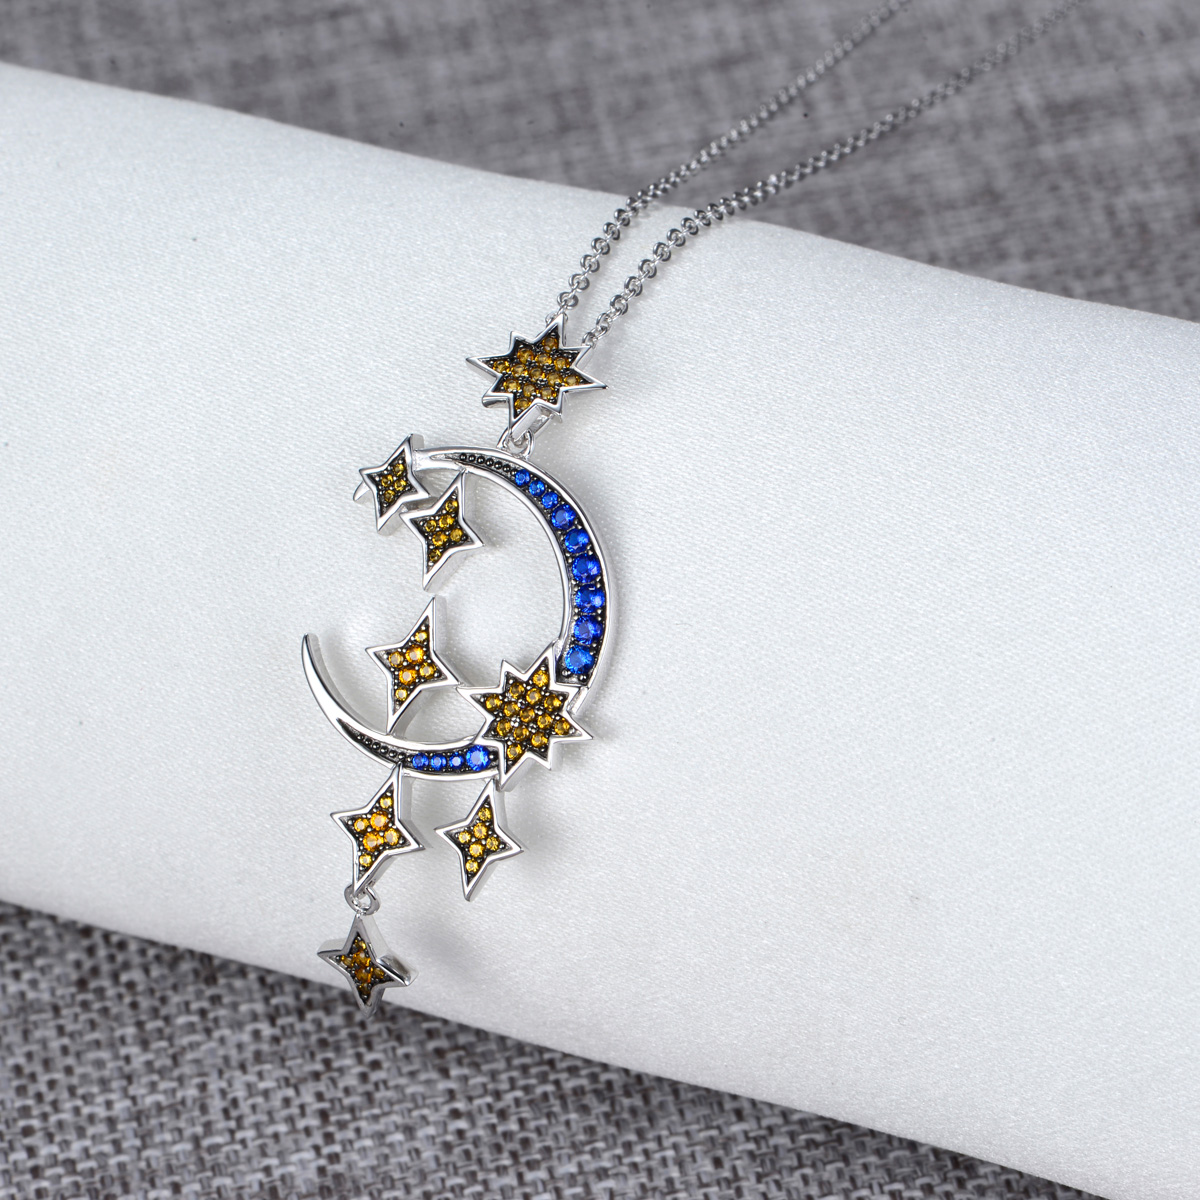 moon and star pendant necklace